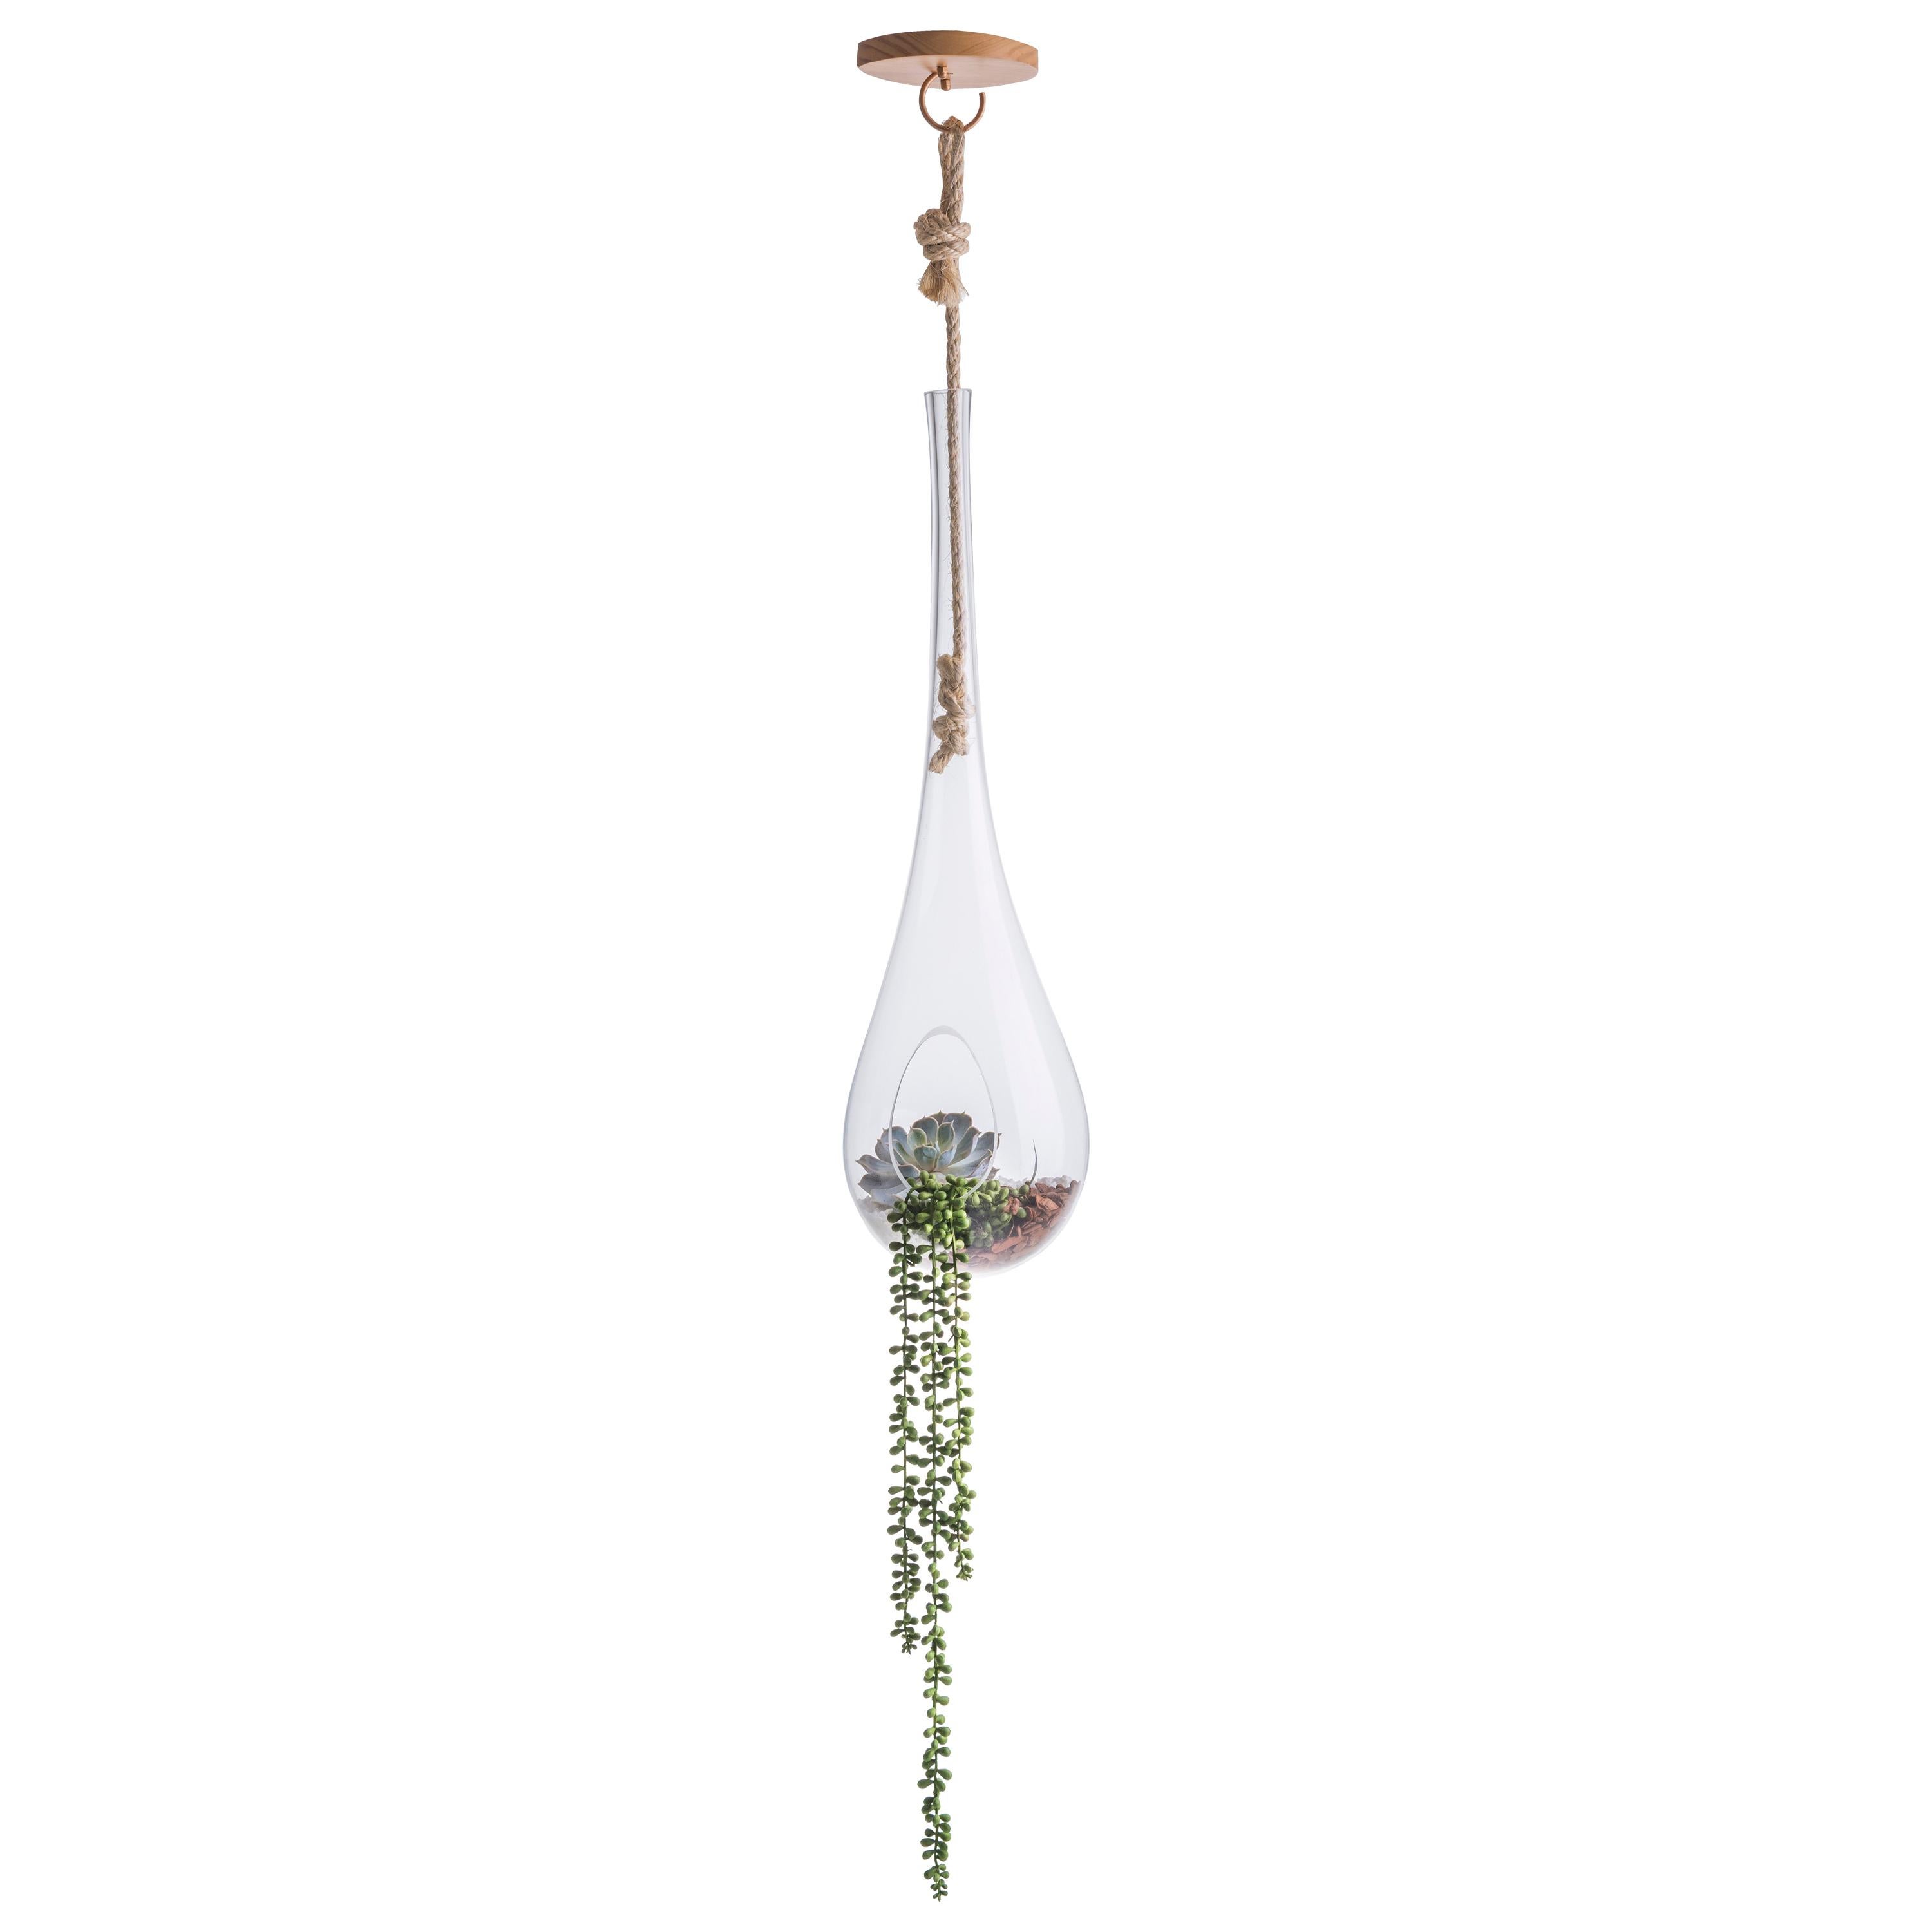 Suspended Terrarium Nest Big Cupola, Brazilian Wood, Glass and Sisal For Sale